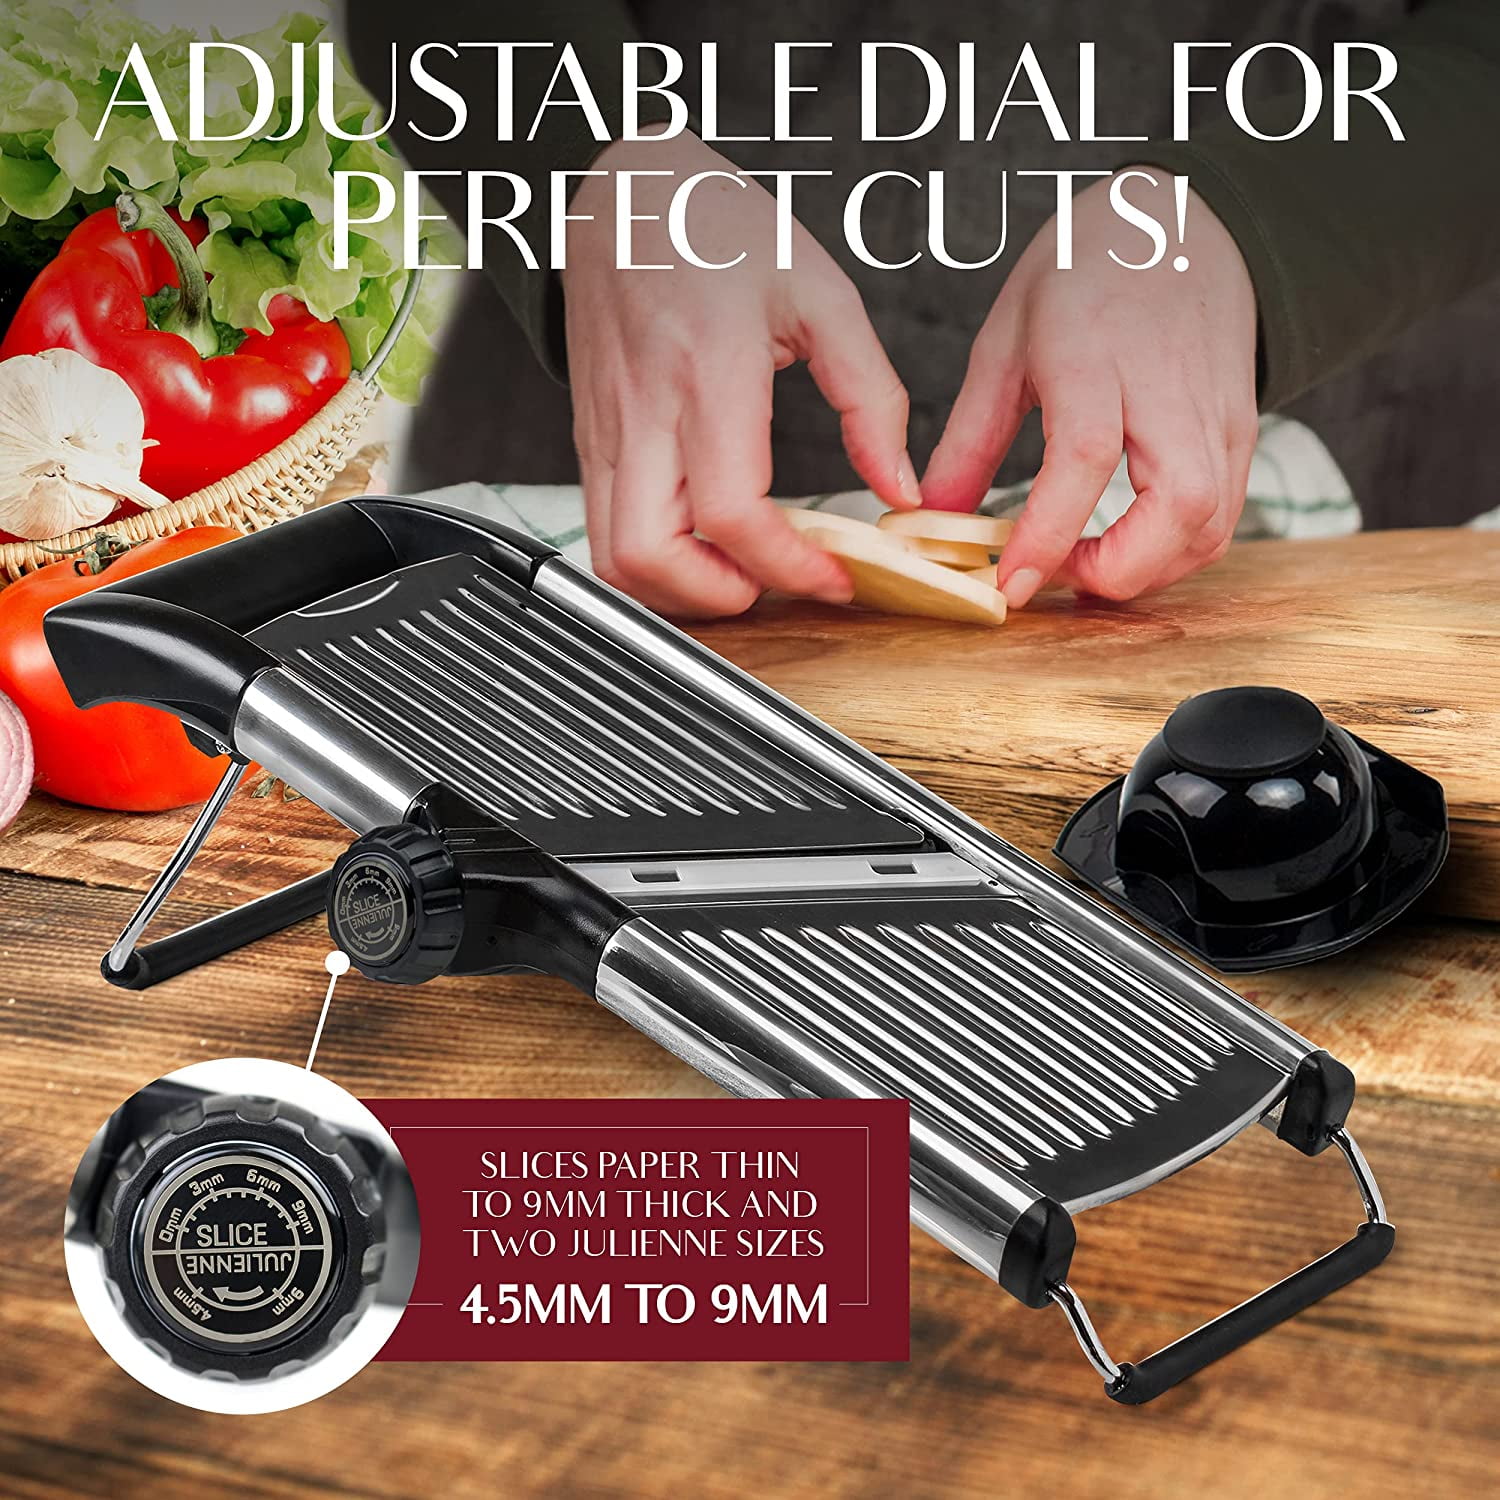 Professional Stainless Steel Mandoline, Multifunction Kitchen Mandoline  With Adjustable Slice Thickness Pxcl